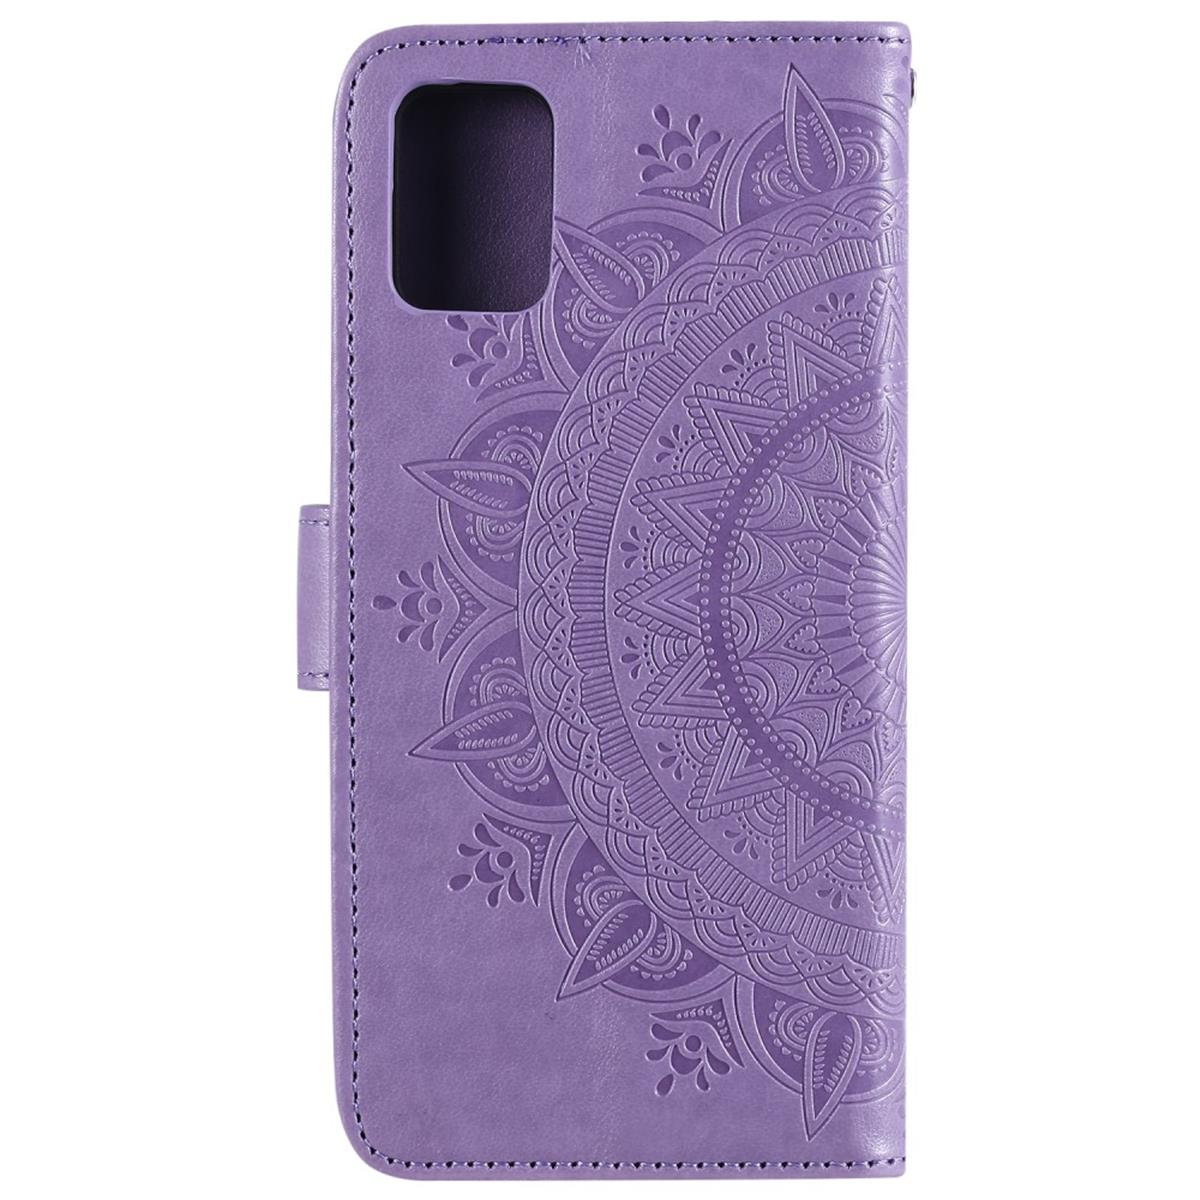 Mandala Muster, mit Galaxy Bookcover, Samsung, Lila A31, Klapphülle COVERKINGZ